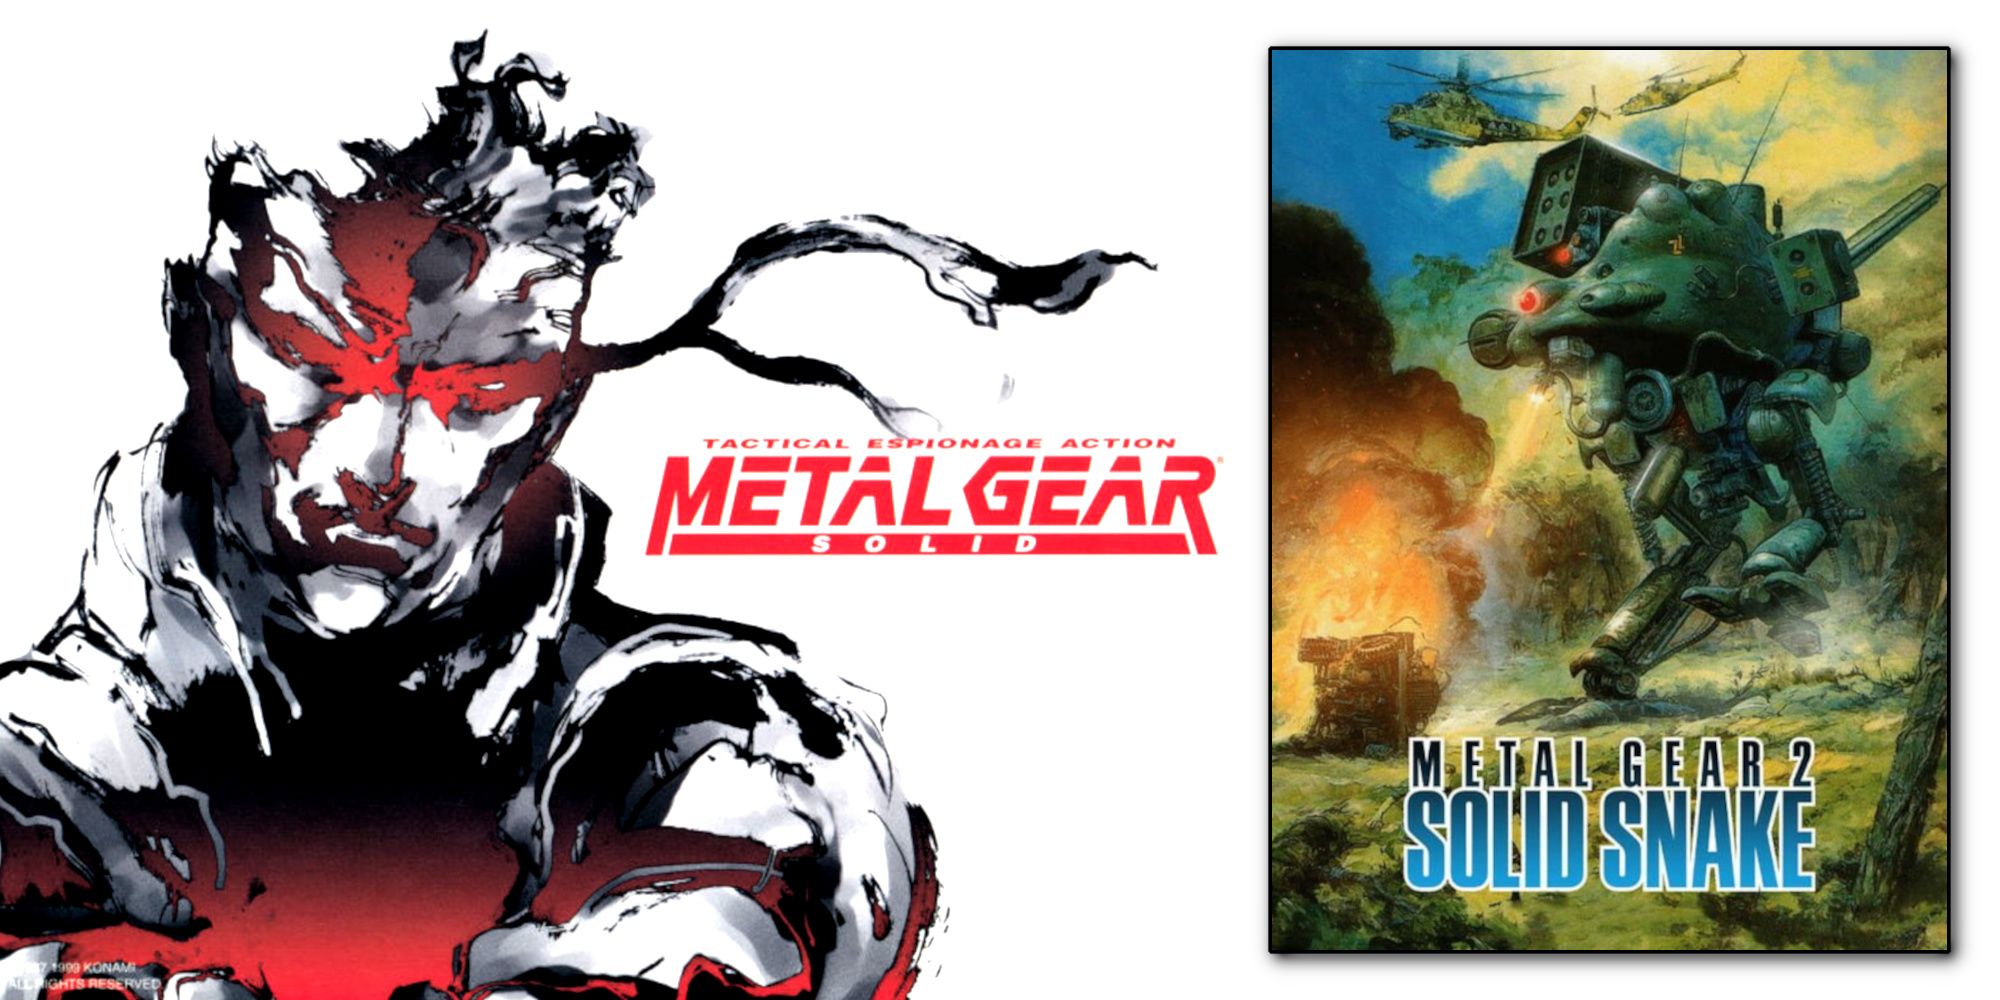 METAL GEAR 2: SOLID SNAKE (OKS Exclusive Variant) – Official